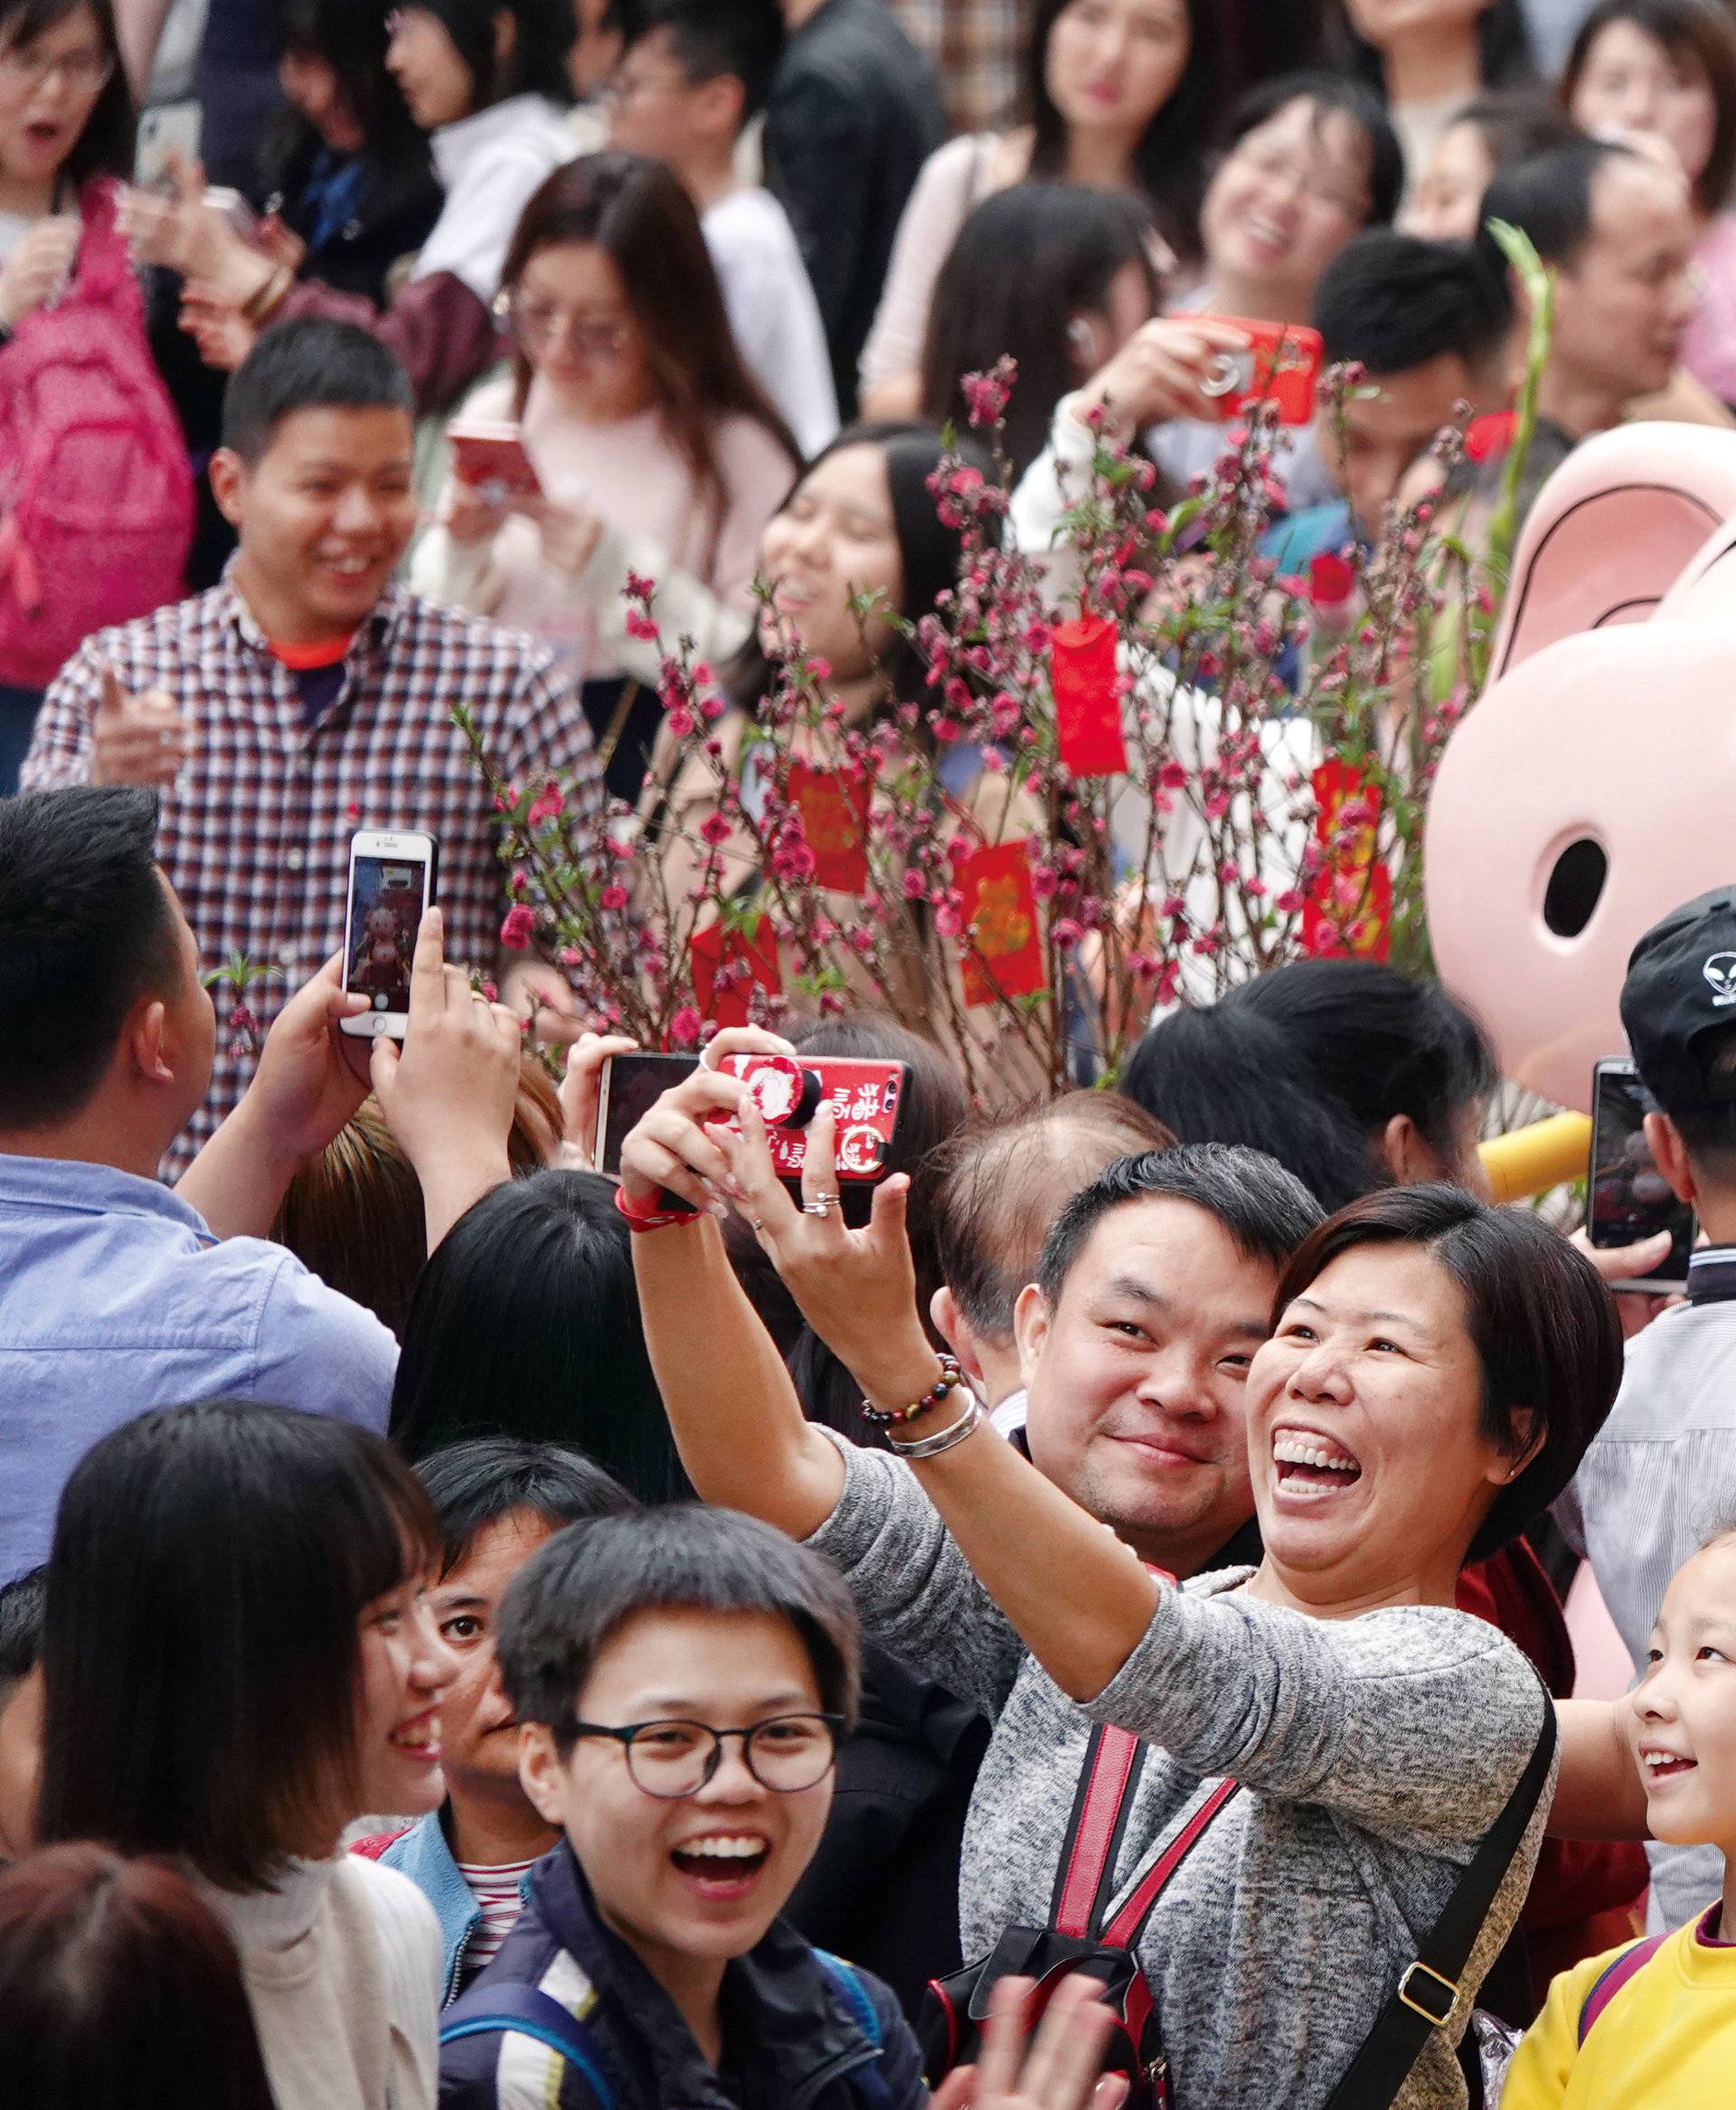 Visitors take pictures of an installation at a flower fair ahead of the Chinese Lunar New Year of the Pig, in Guangzhou